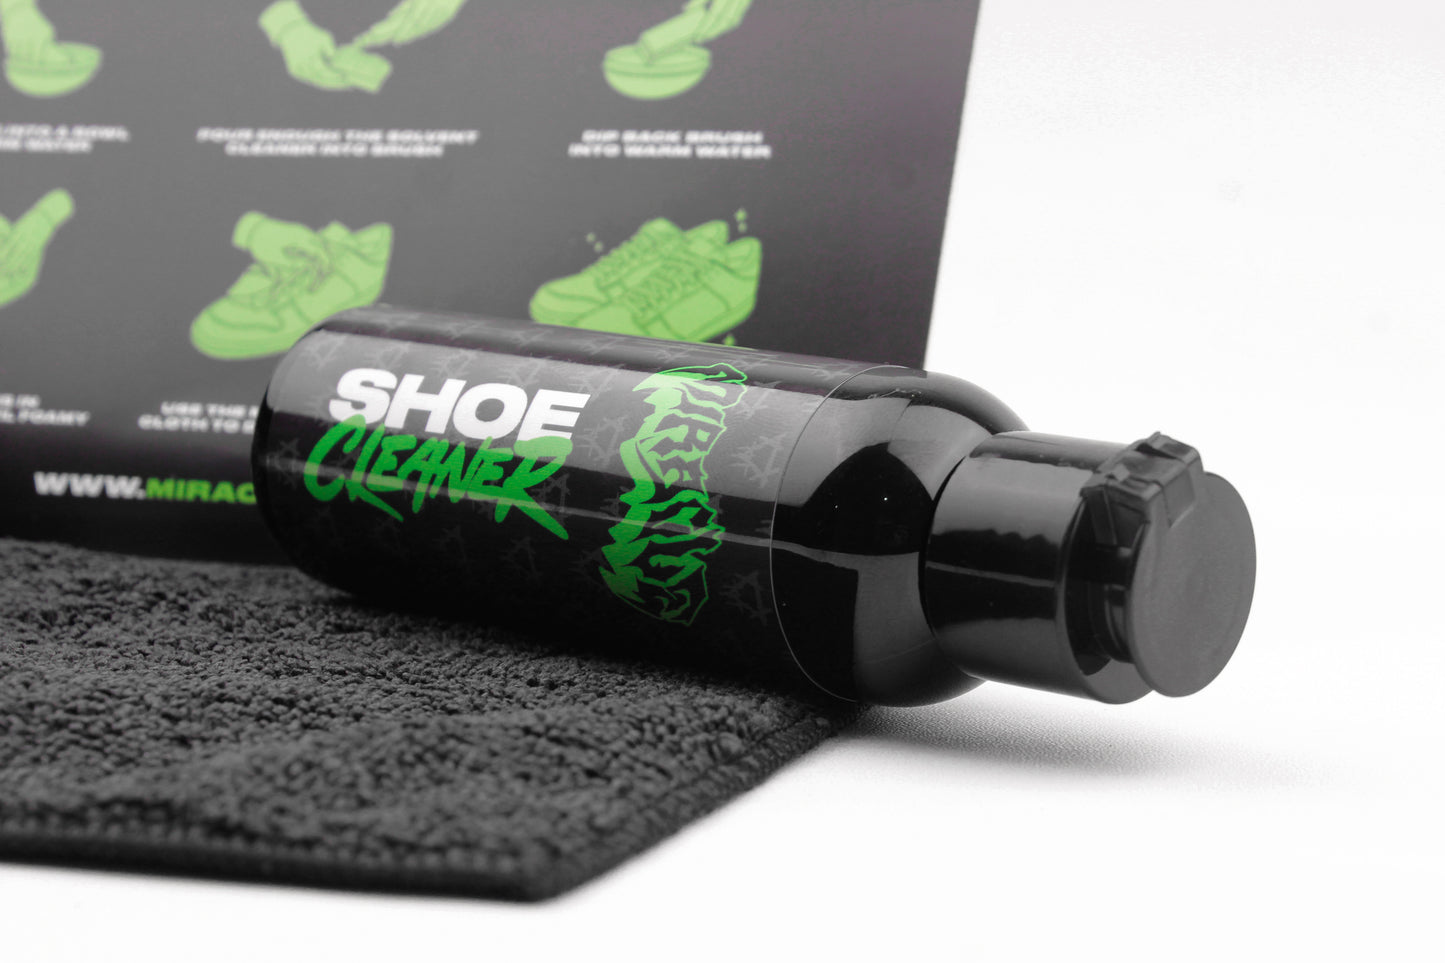 Miracle Mates - Miracle Shoes Cleaner Starter Clean